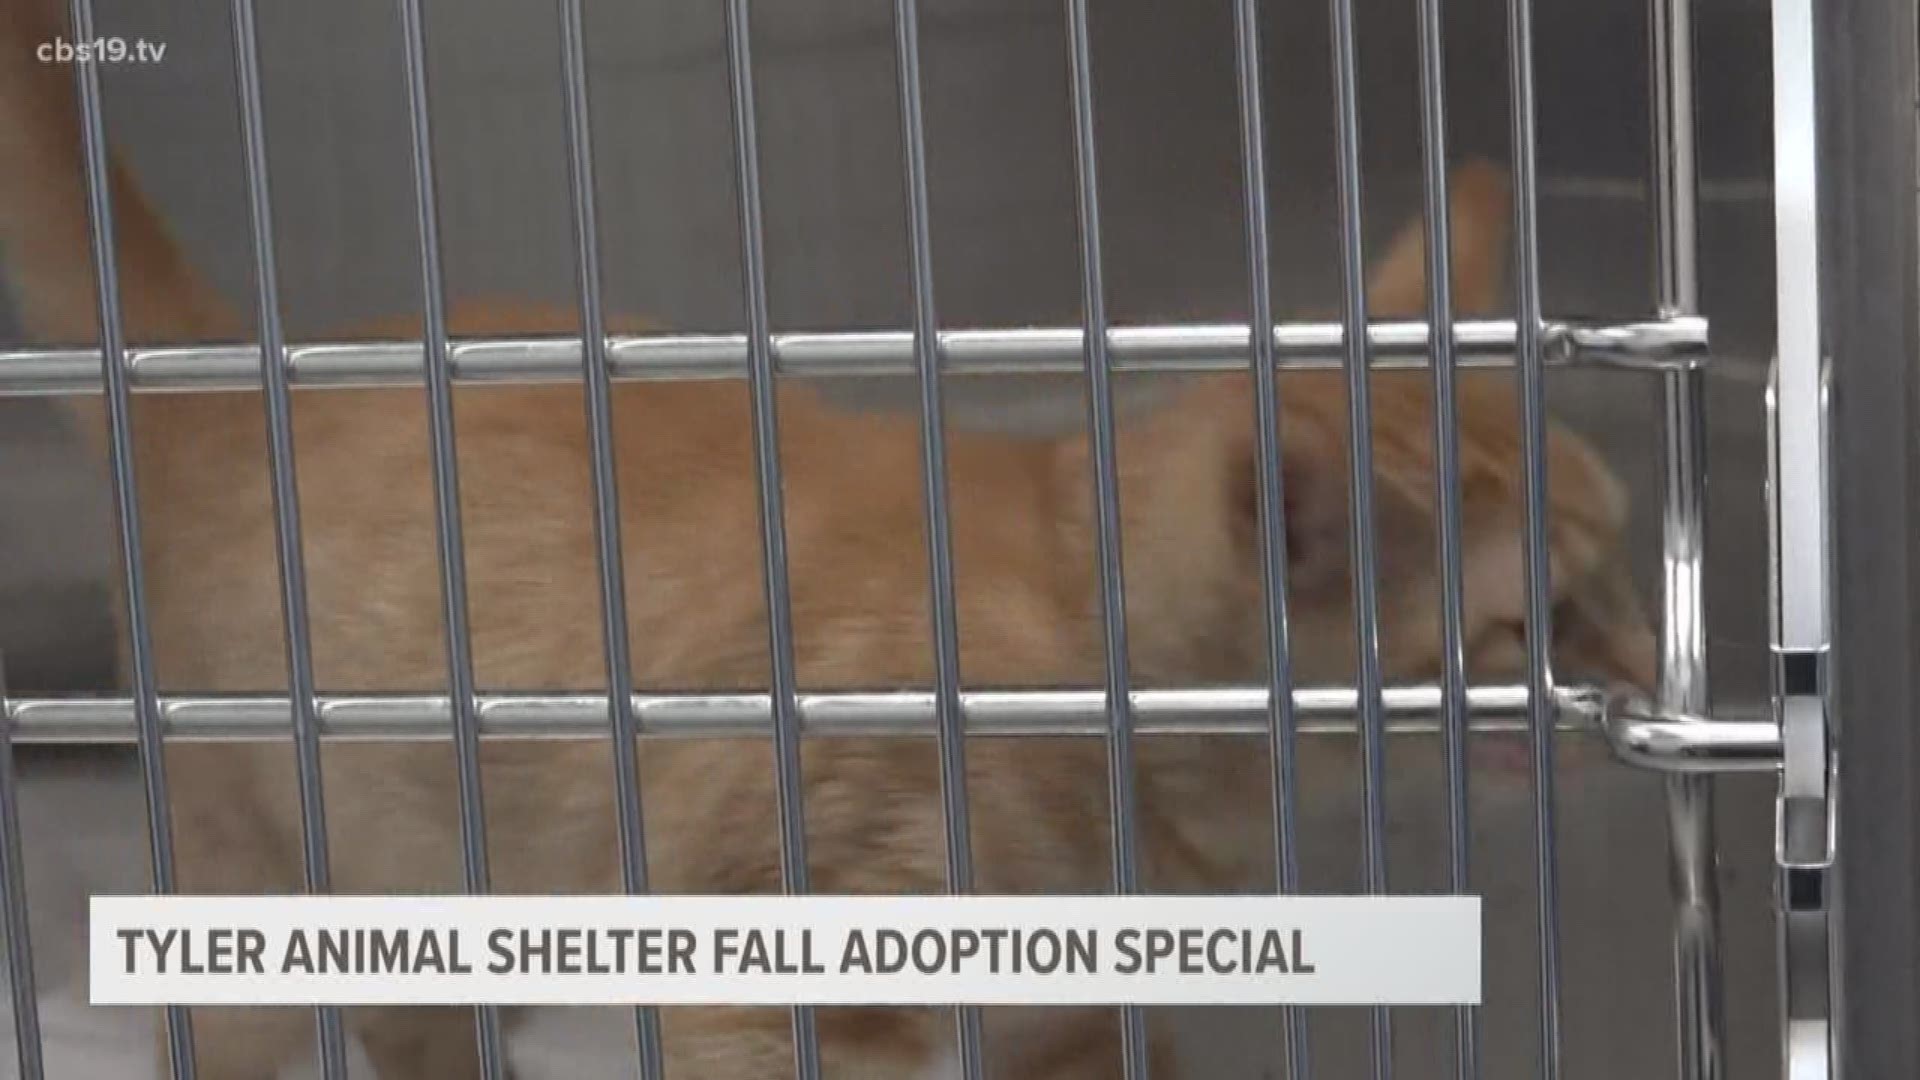 For six fleece blankets the Tyler animal shelter will waive fees for cats with any orange fur.